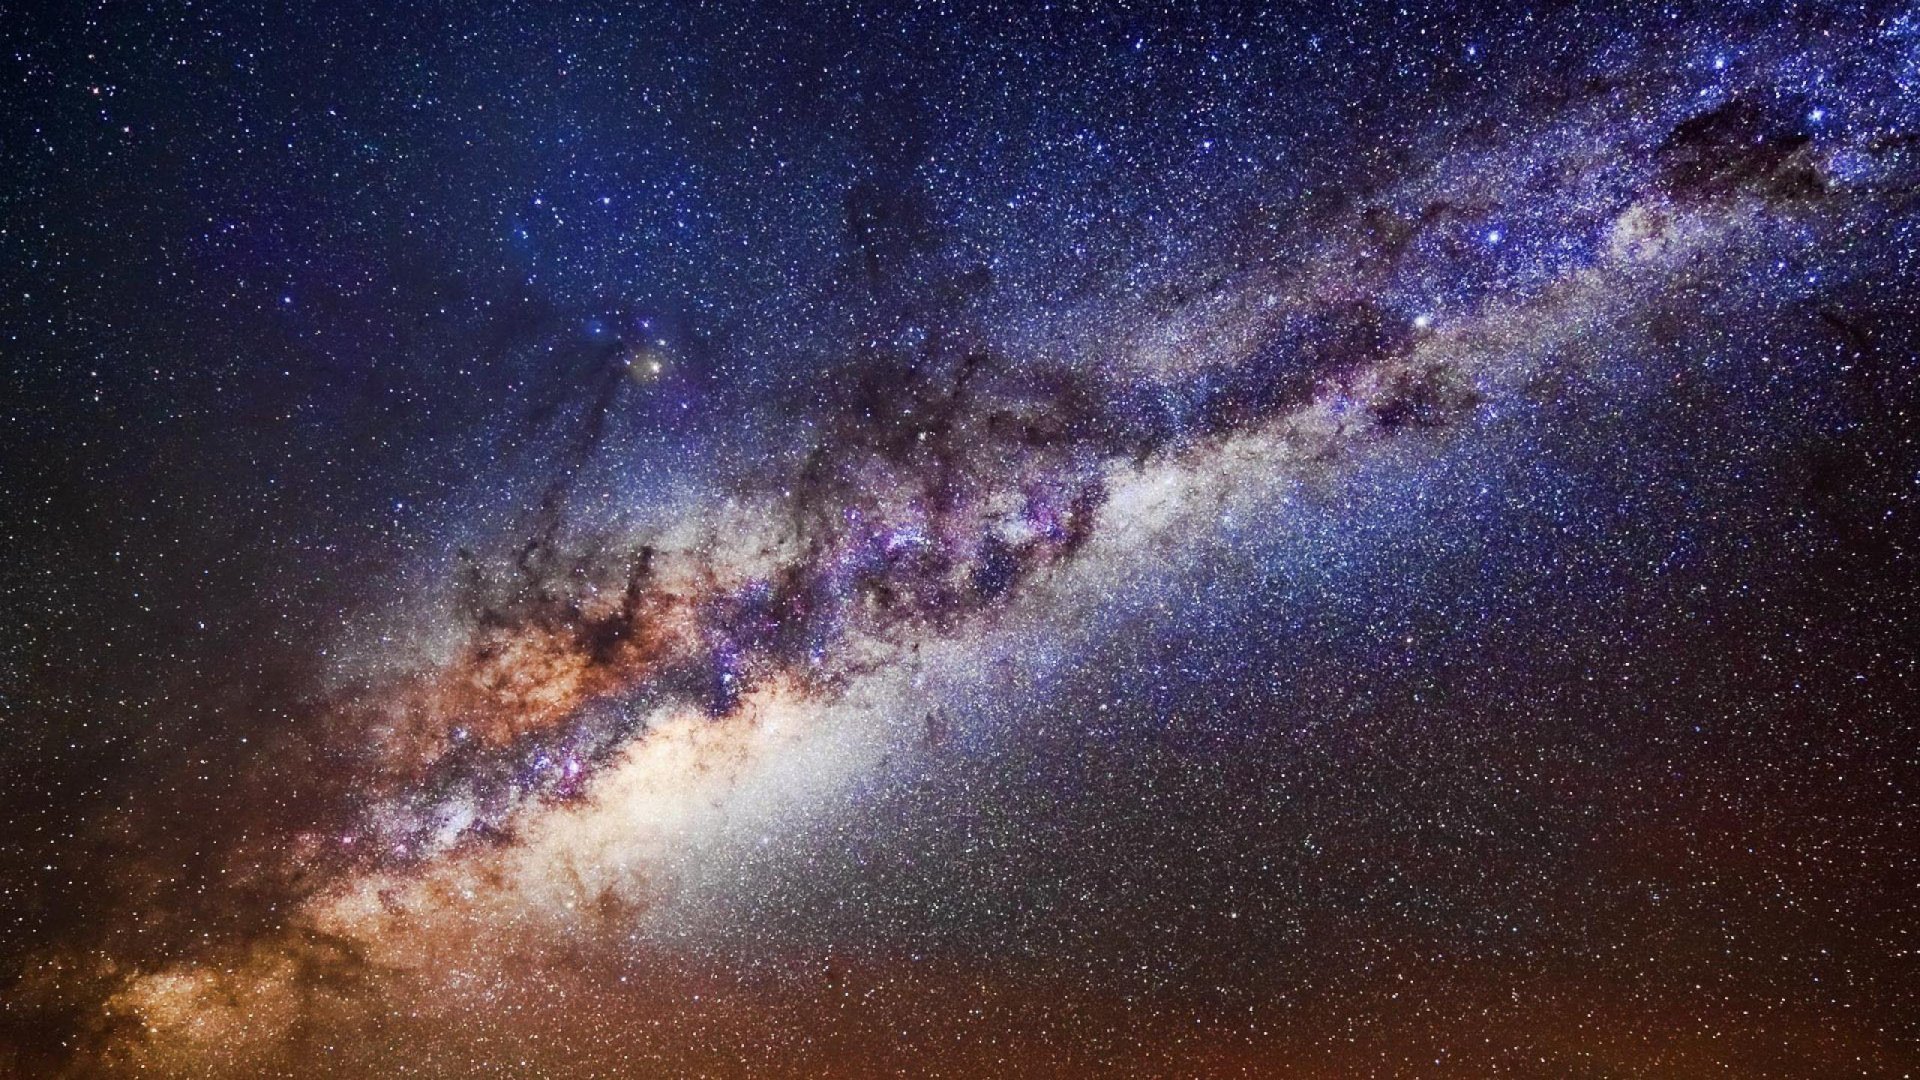 Blue and White Starry Night Sky. Wallpaper in 1920x1080 Resolution